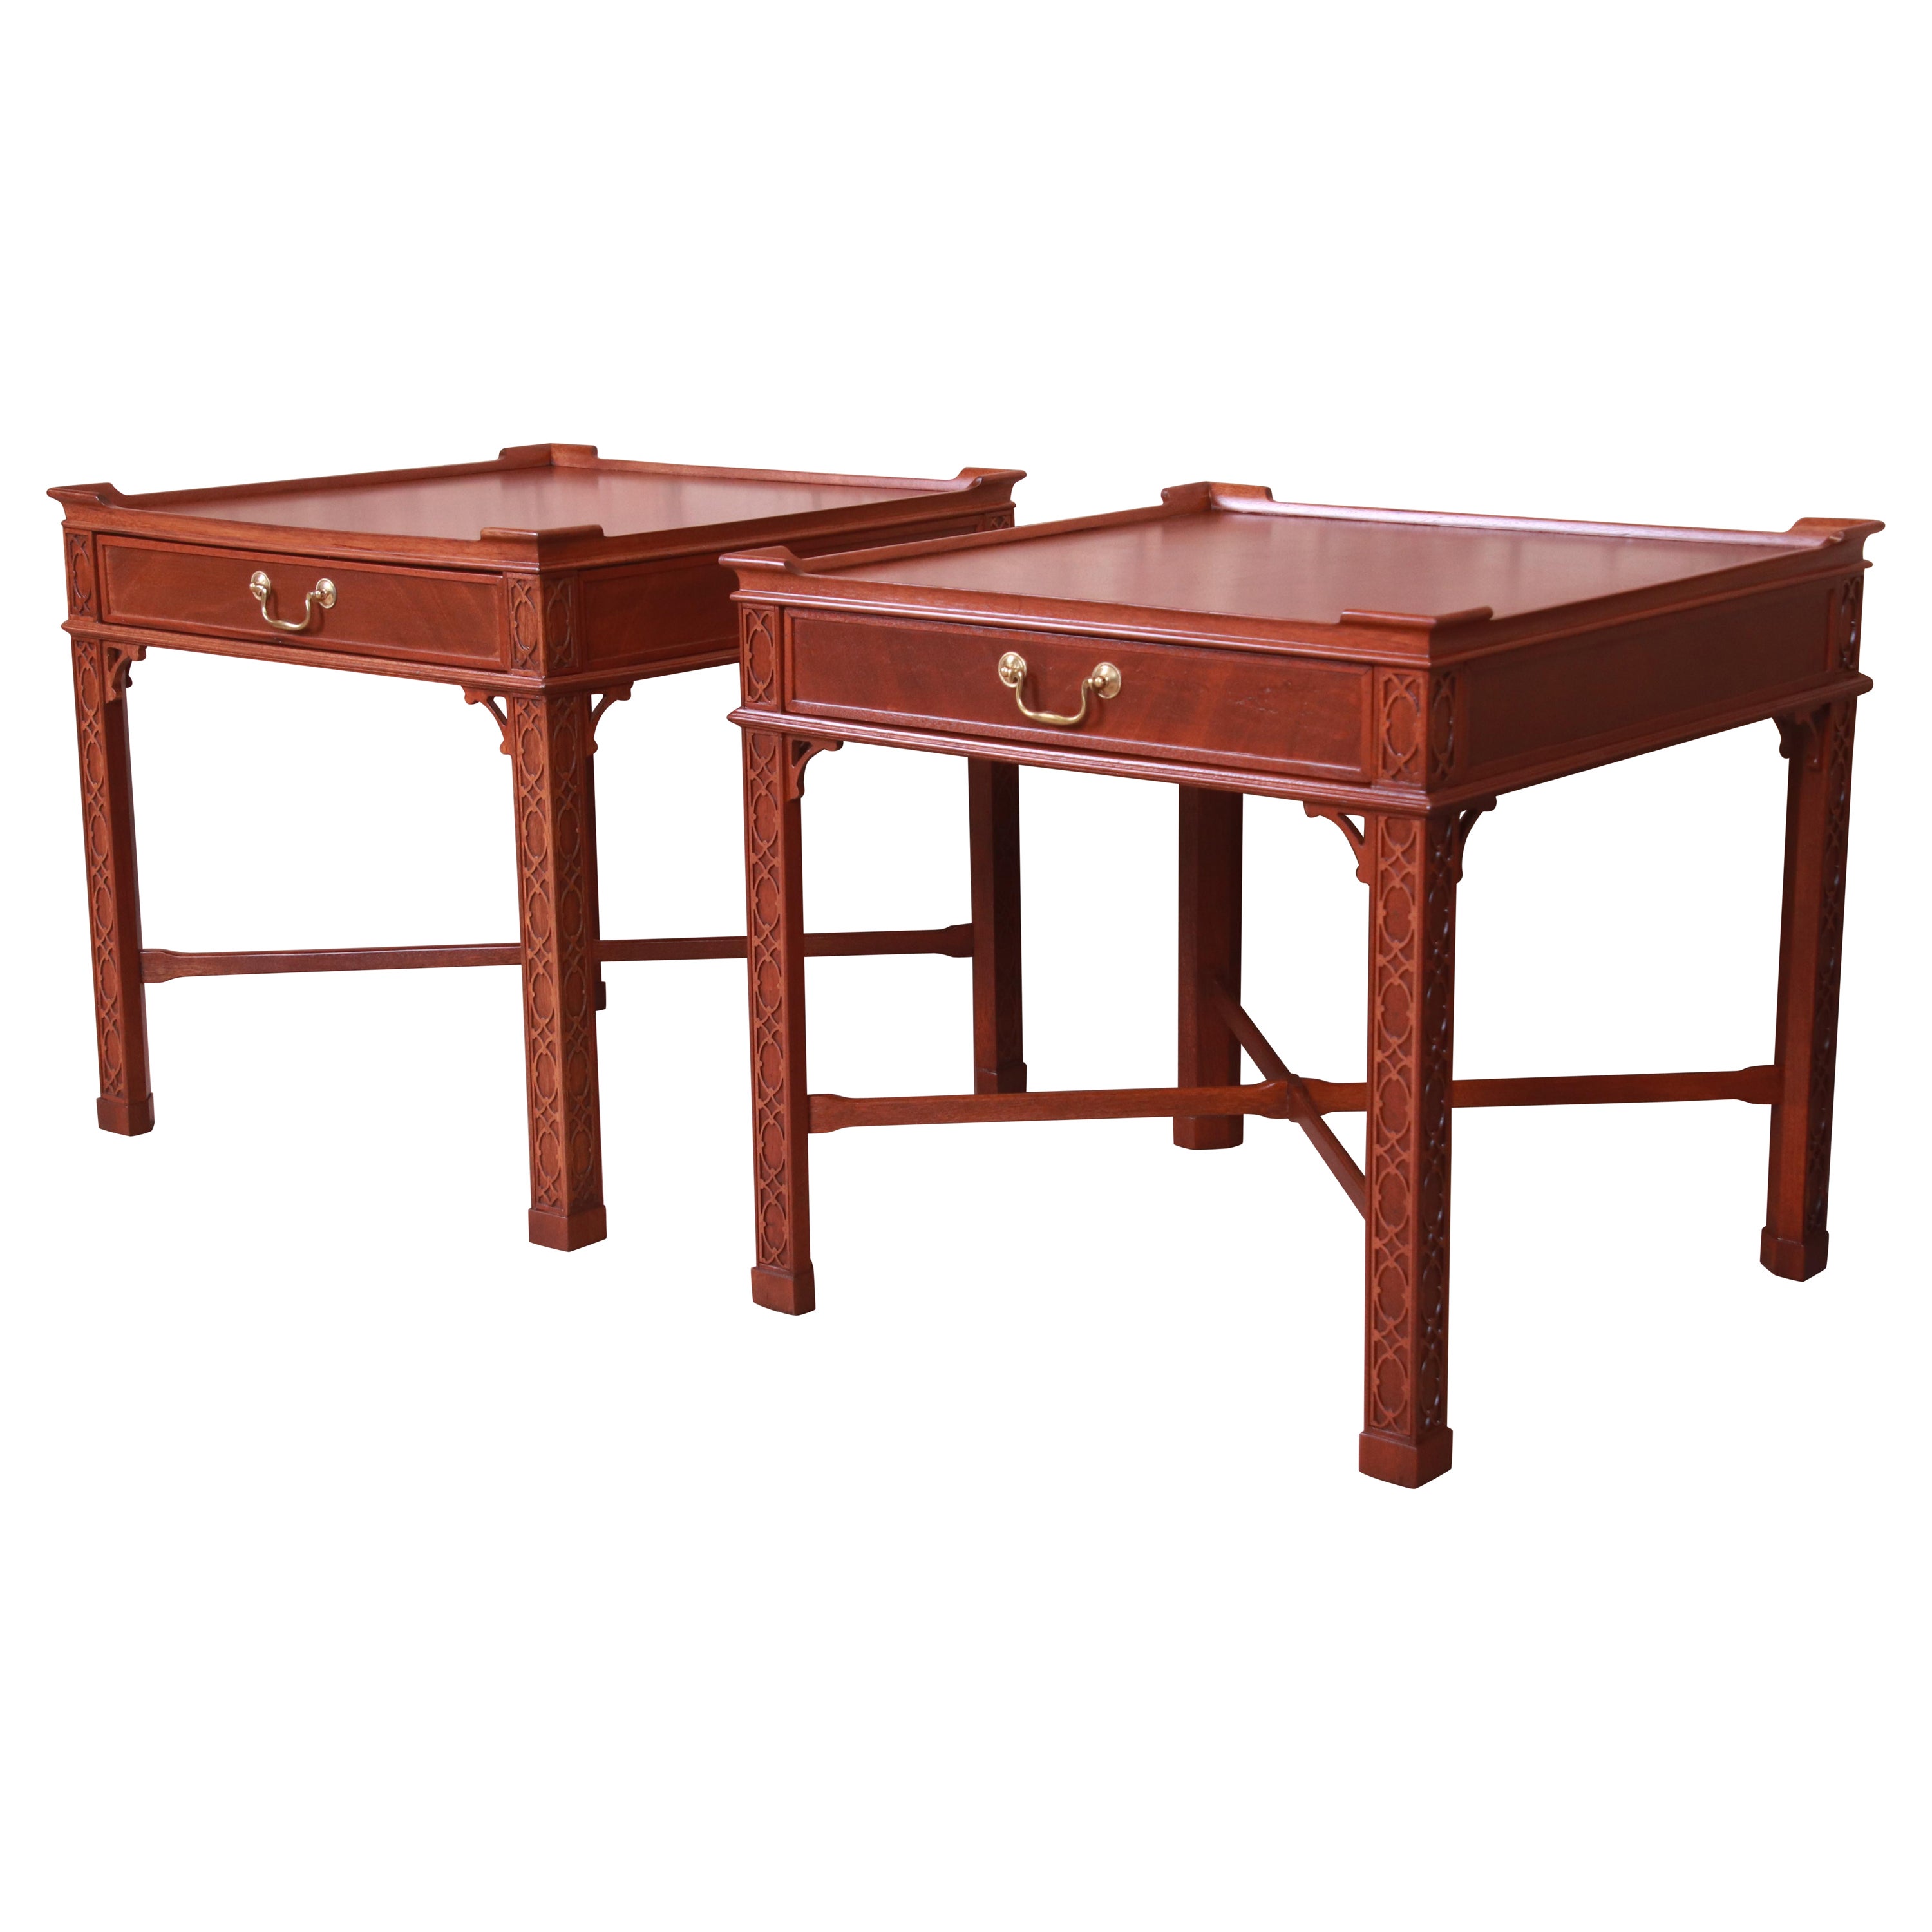 Baker Furniture Chinese Chippendale Carved Mahogany Bedside Tables, Refinished